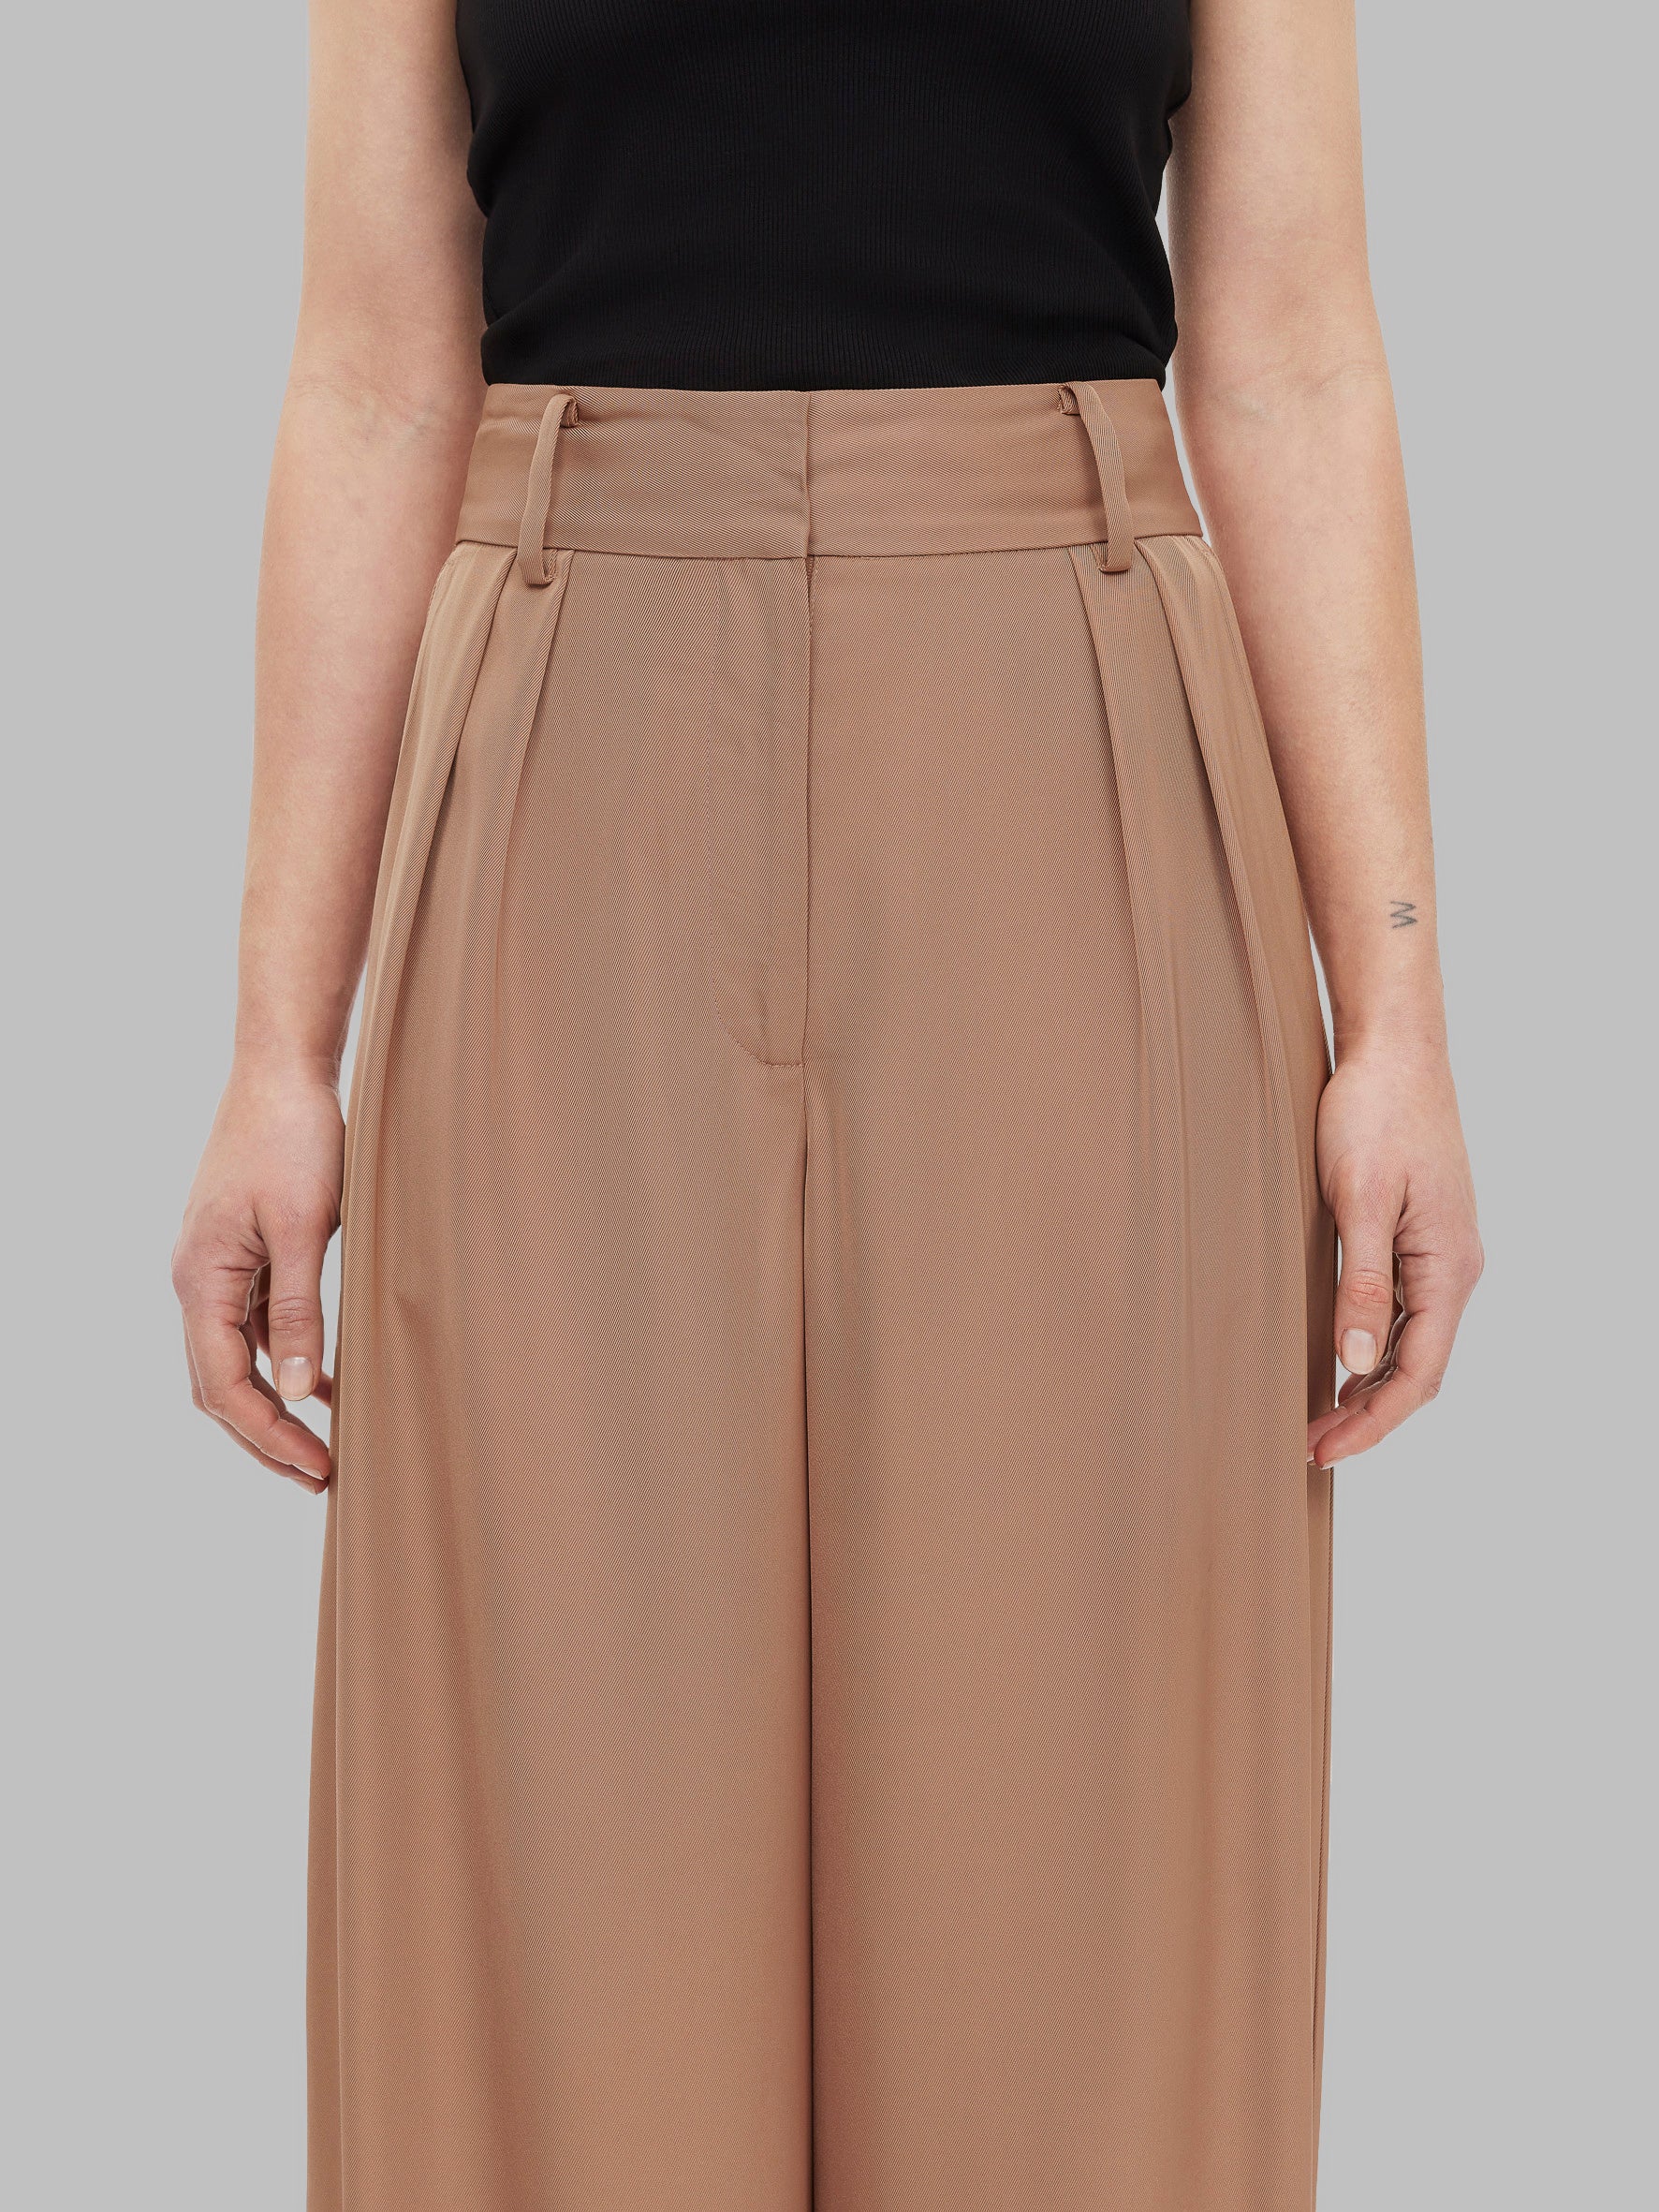 By Malene Birger Piscali Mid-Rise Pants - Tobacco Brown - 6